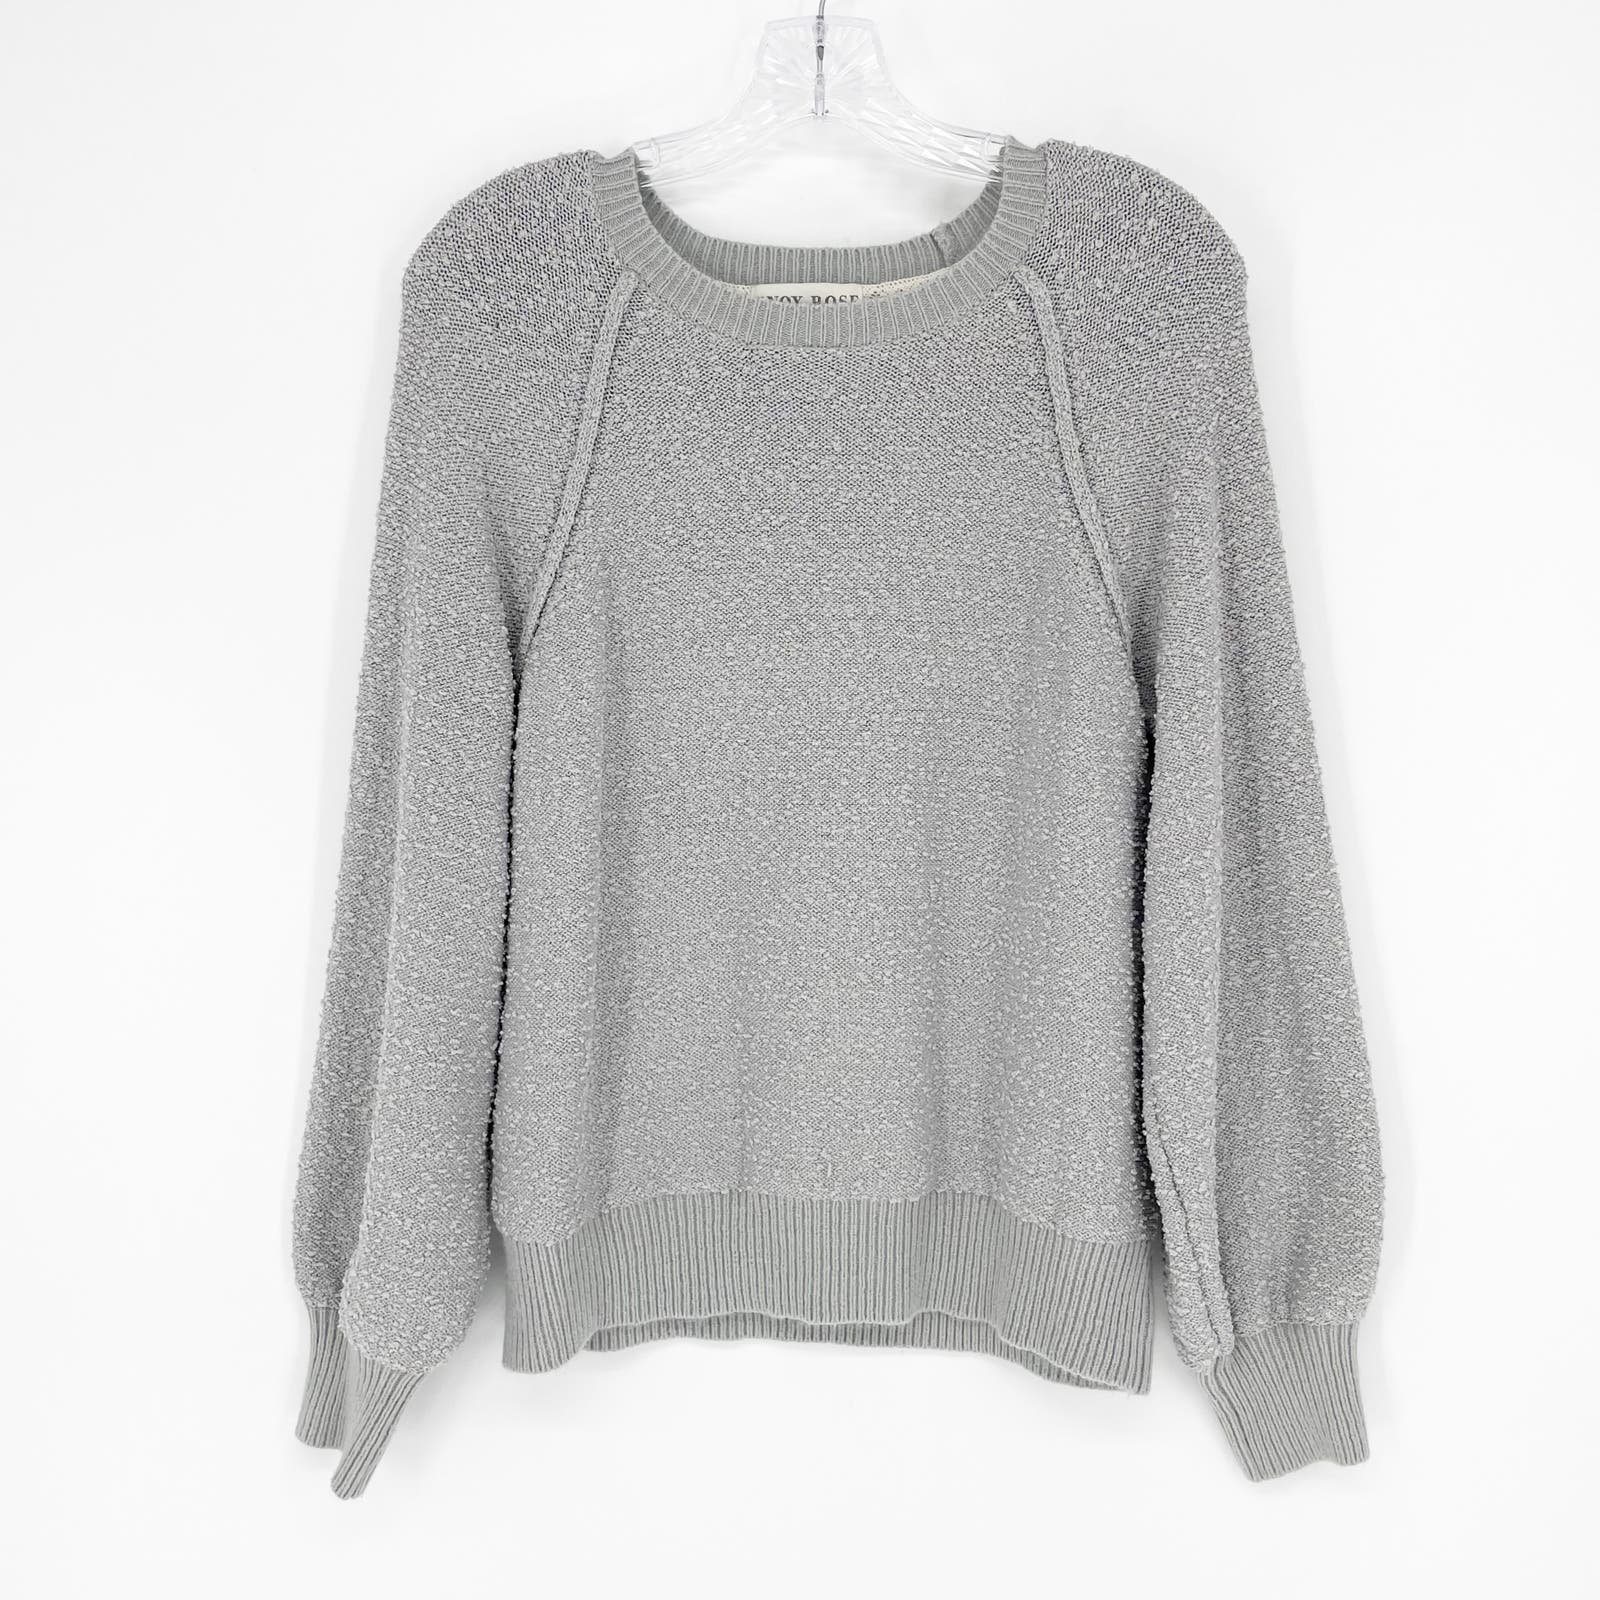 high discount Knox Rose Textured Gray Knit Sweater Size Small PEgnJYvuz Discount